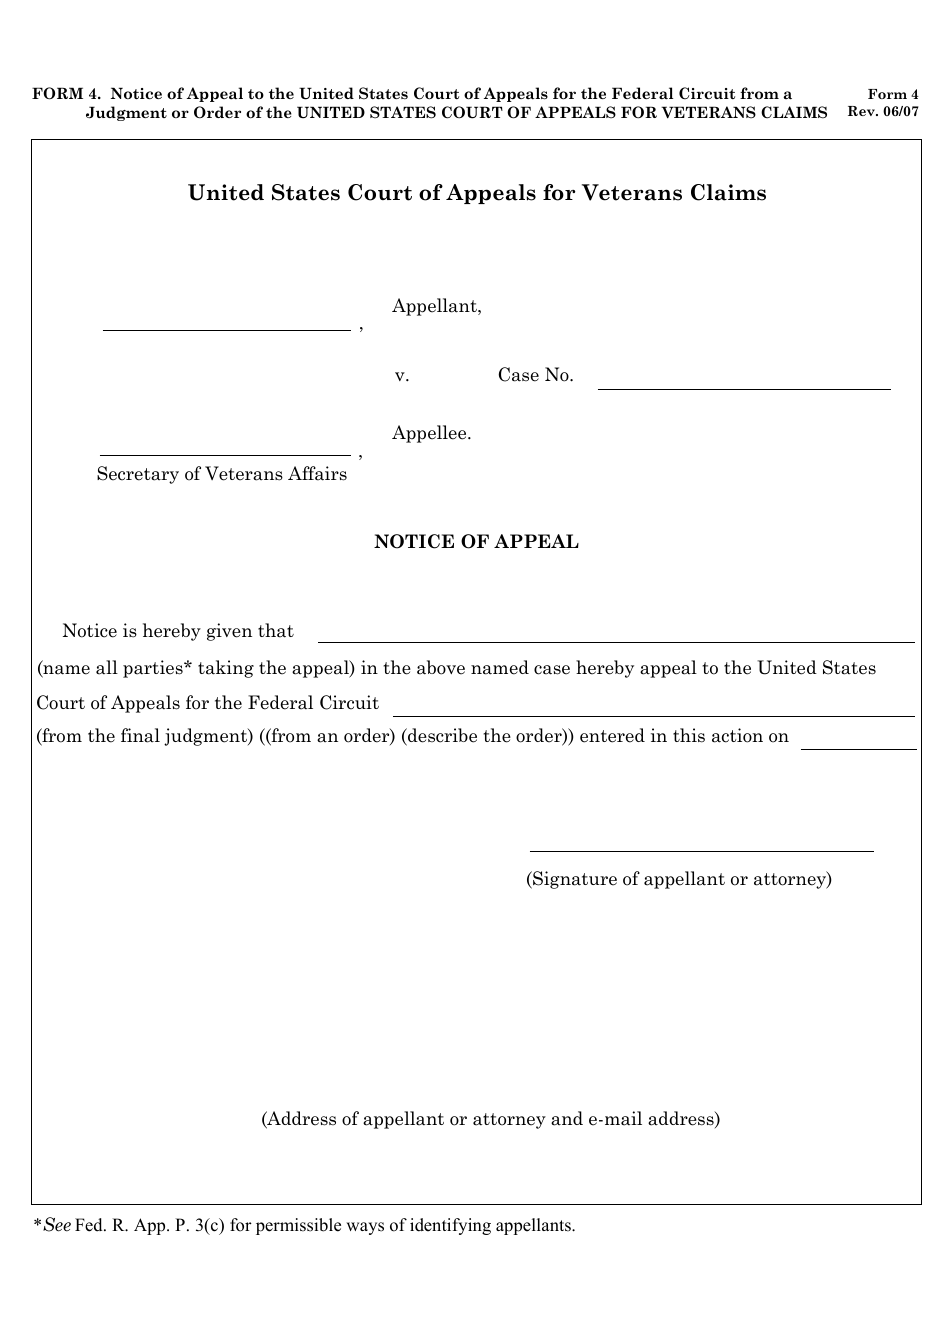 Form 4 Notice of Appeal to the United States Court of Appeals for the Federal Circuit From a Judgment or Order of the United States Court of Appeals for Veterans Claims, Page 1